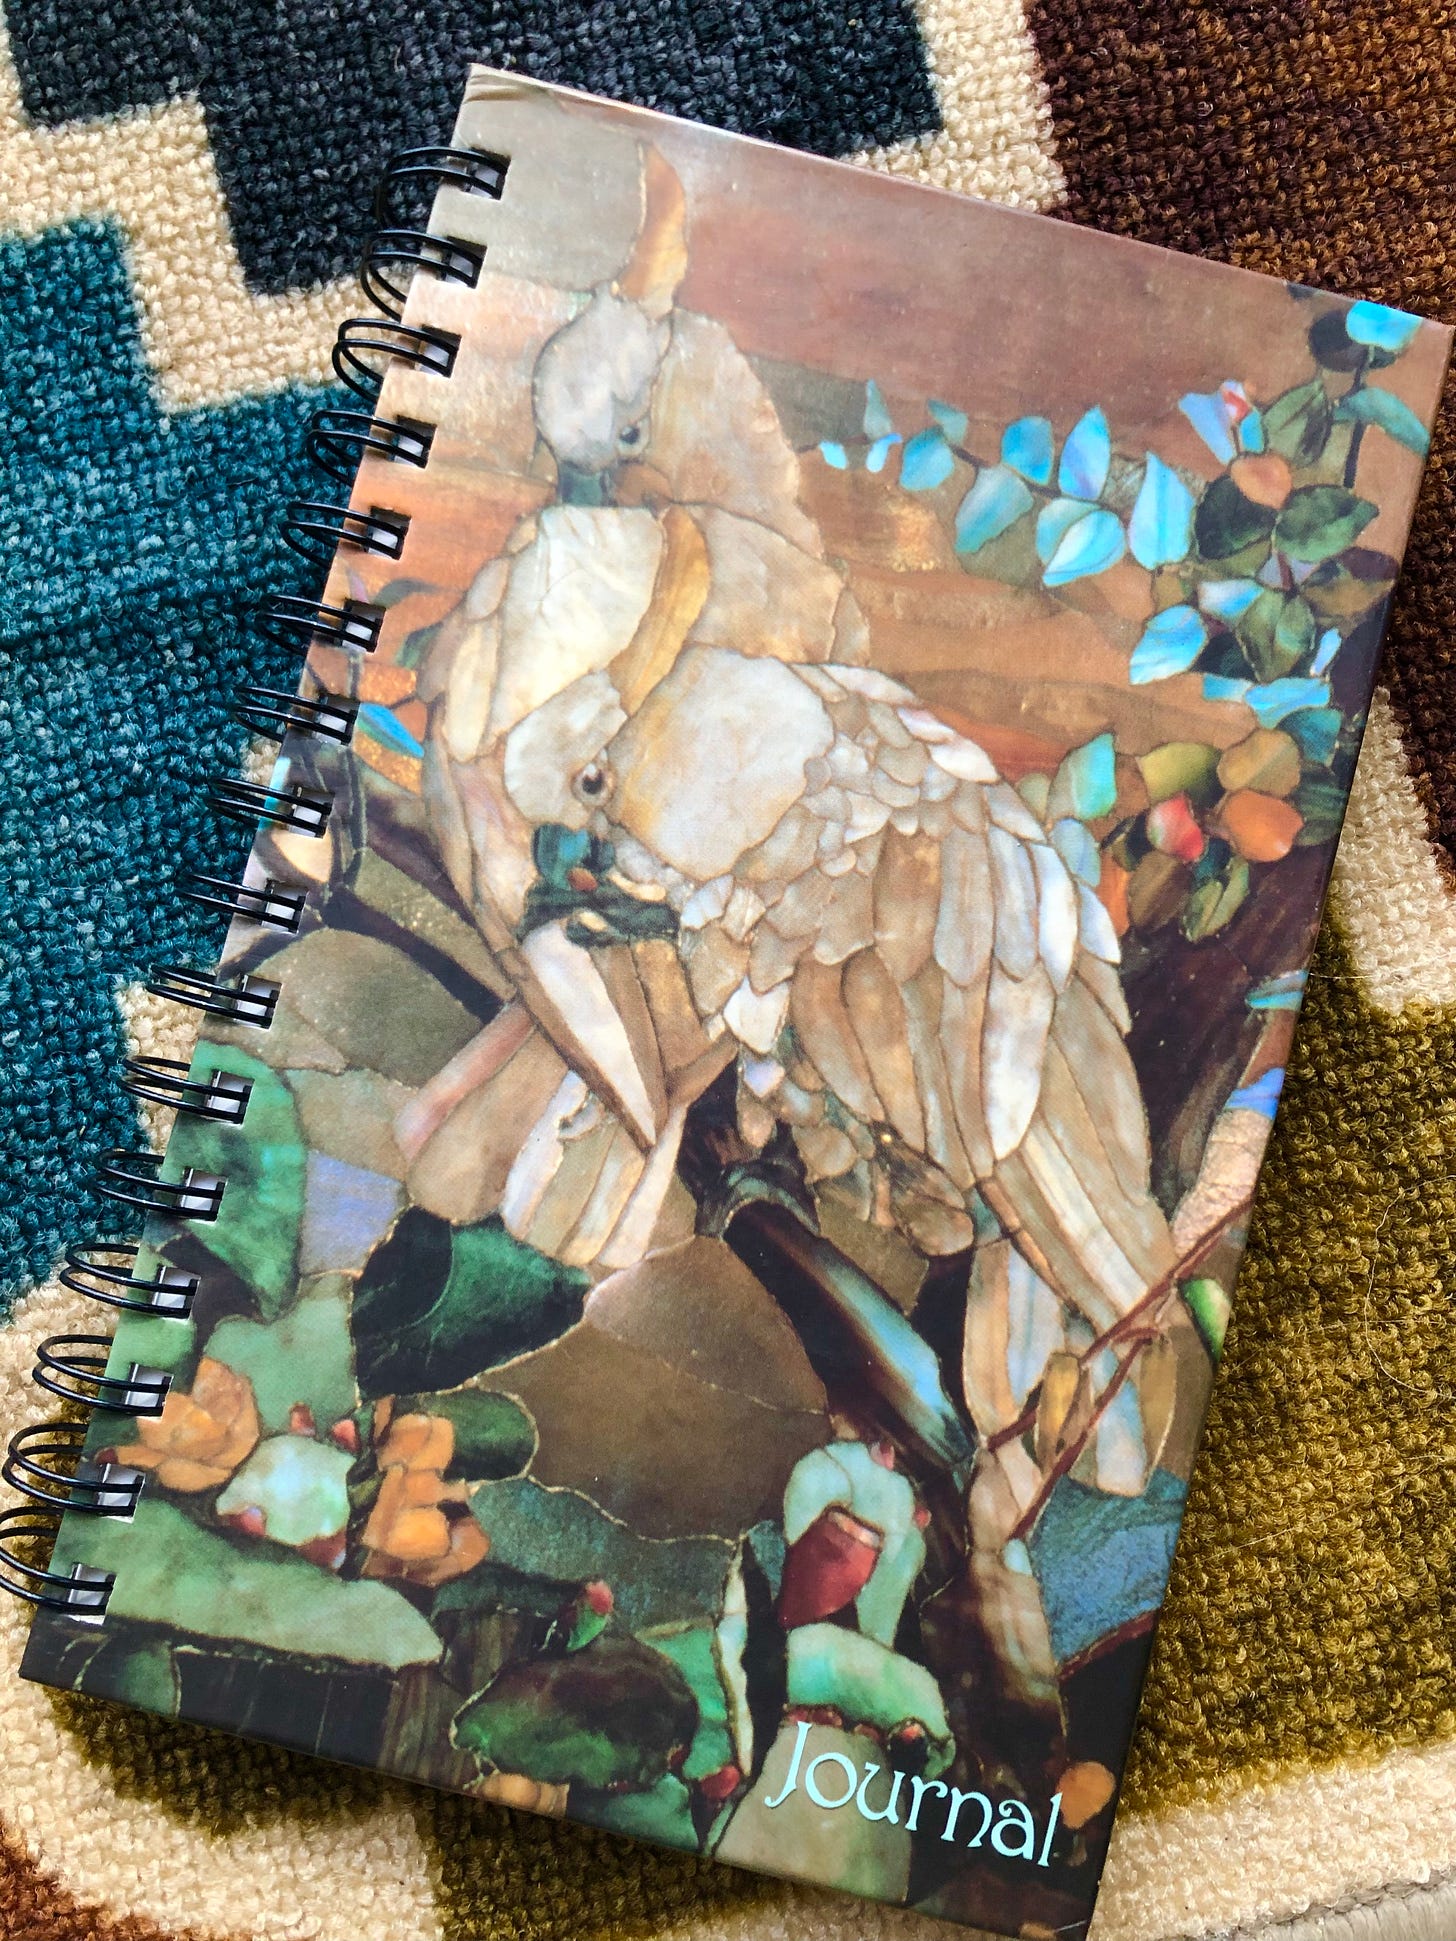 A journal's cover bears the image of two white love-birds rendered in stained glass.